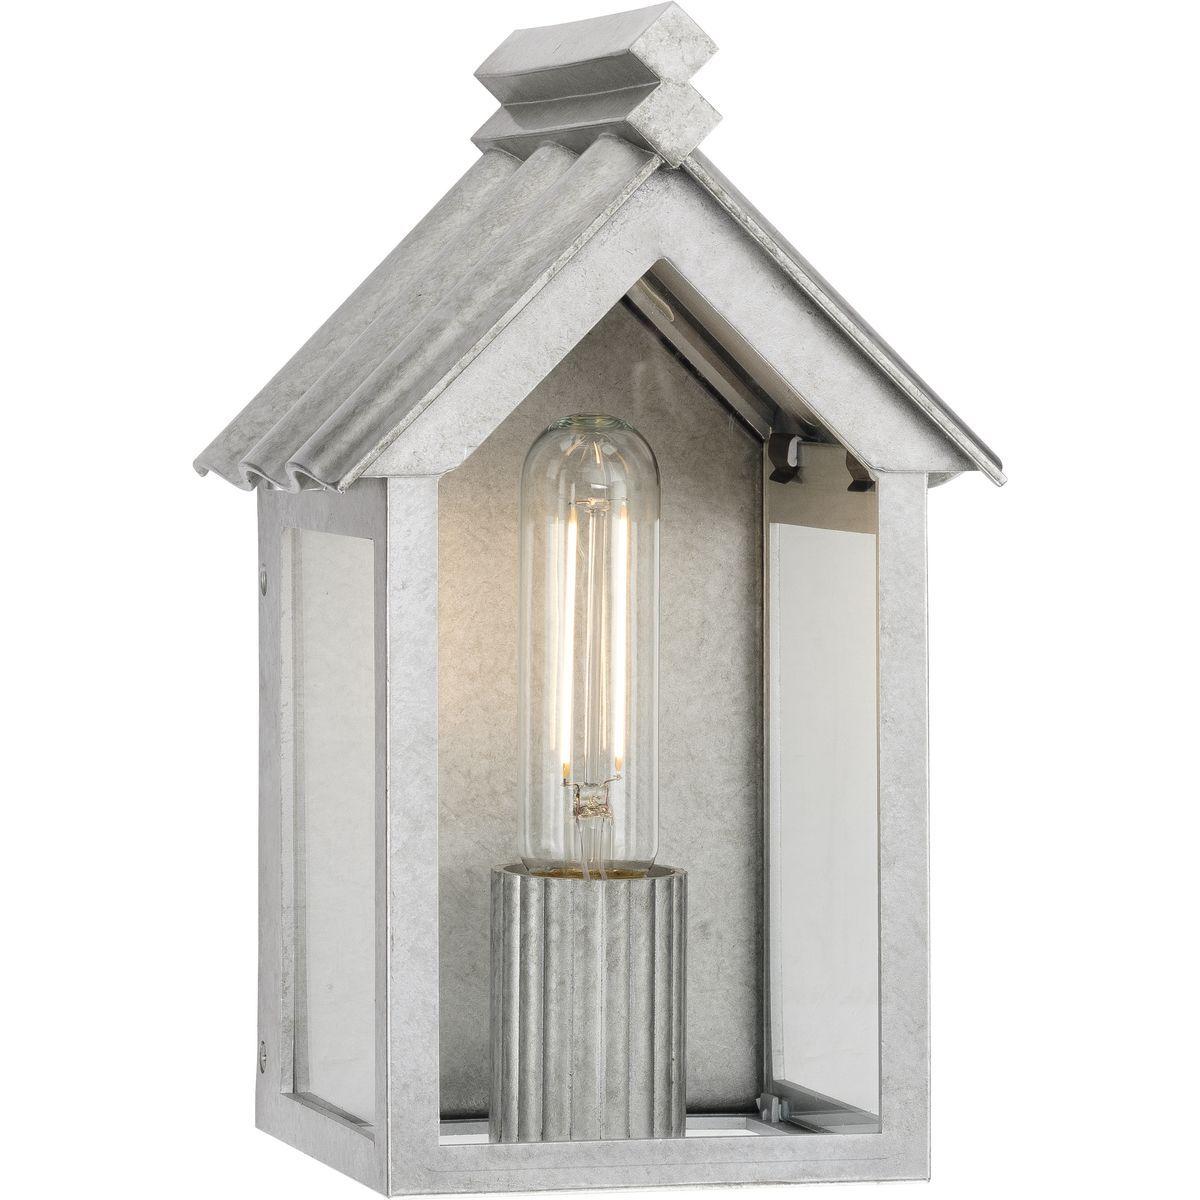 Point Dume Dunemere 11 in. Outdoor Wall Light